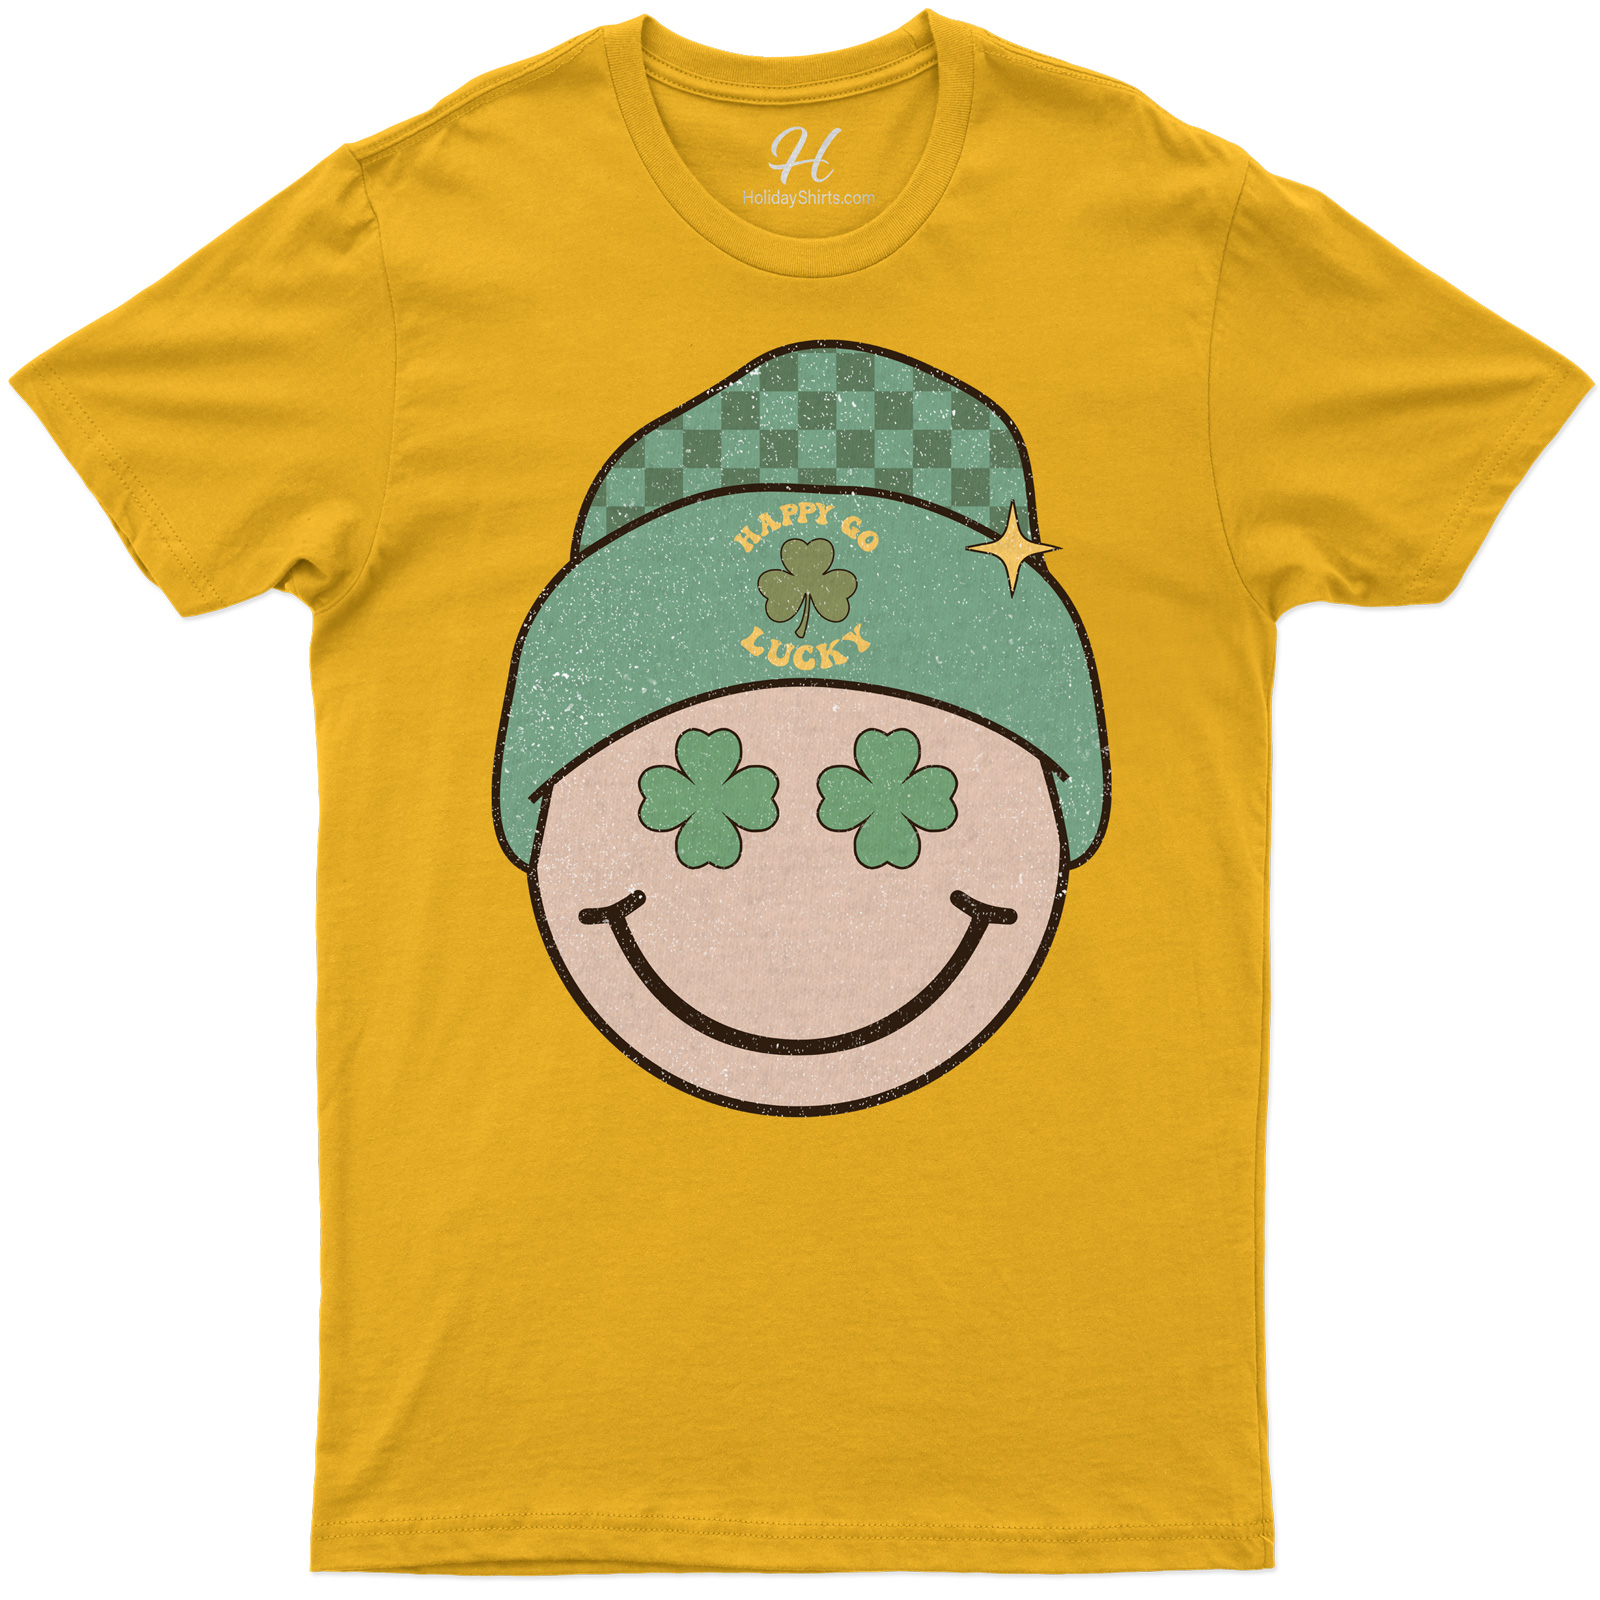 Happy-go-lucky Smiley Face St. Patrick's Day Tee With Clover Accents